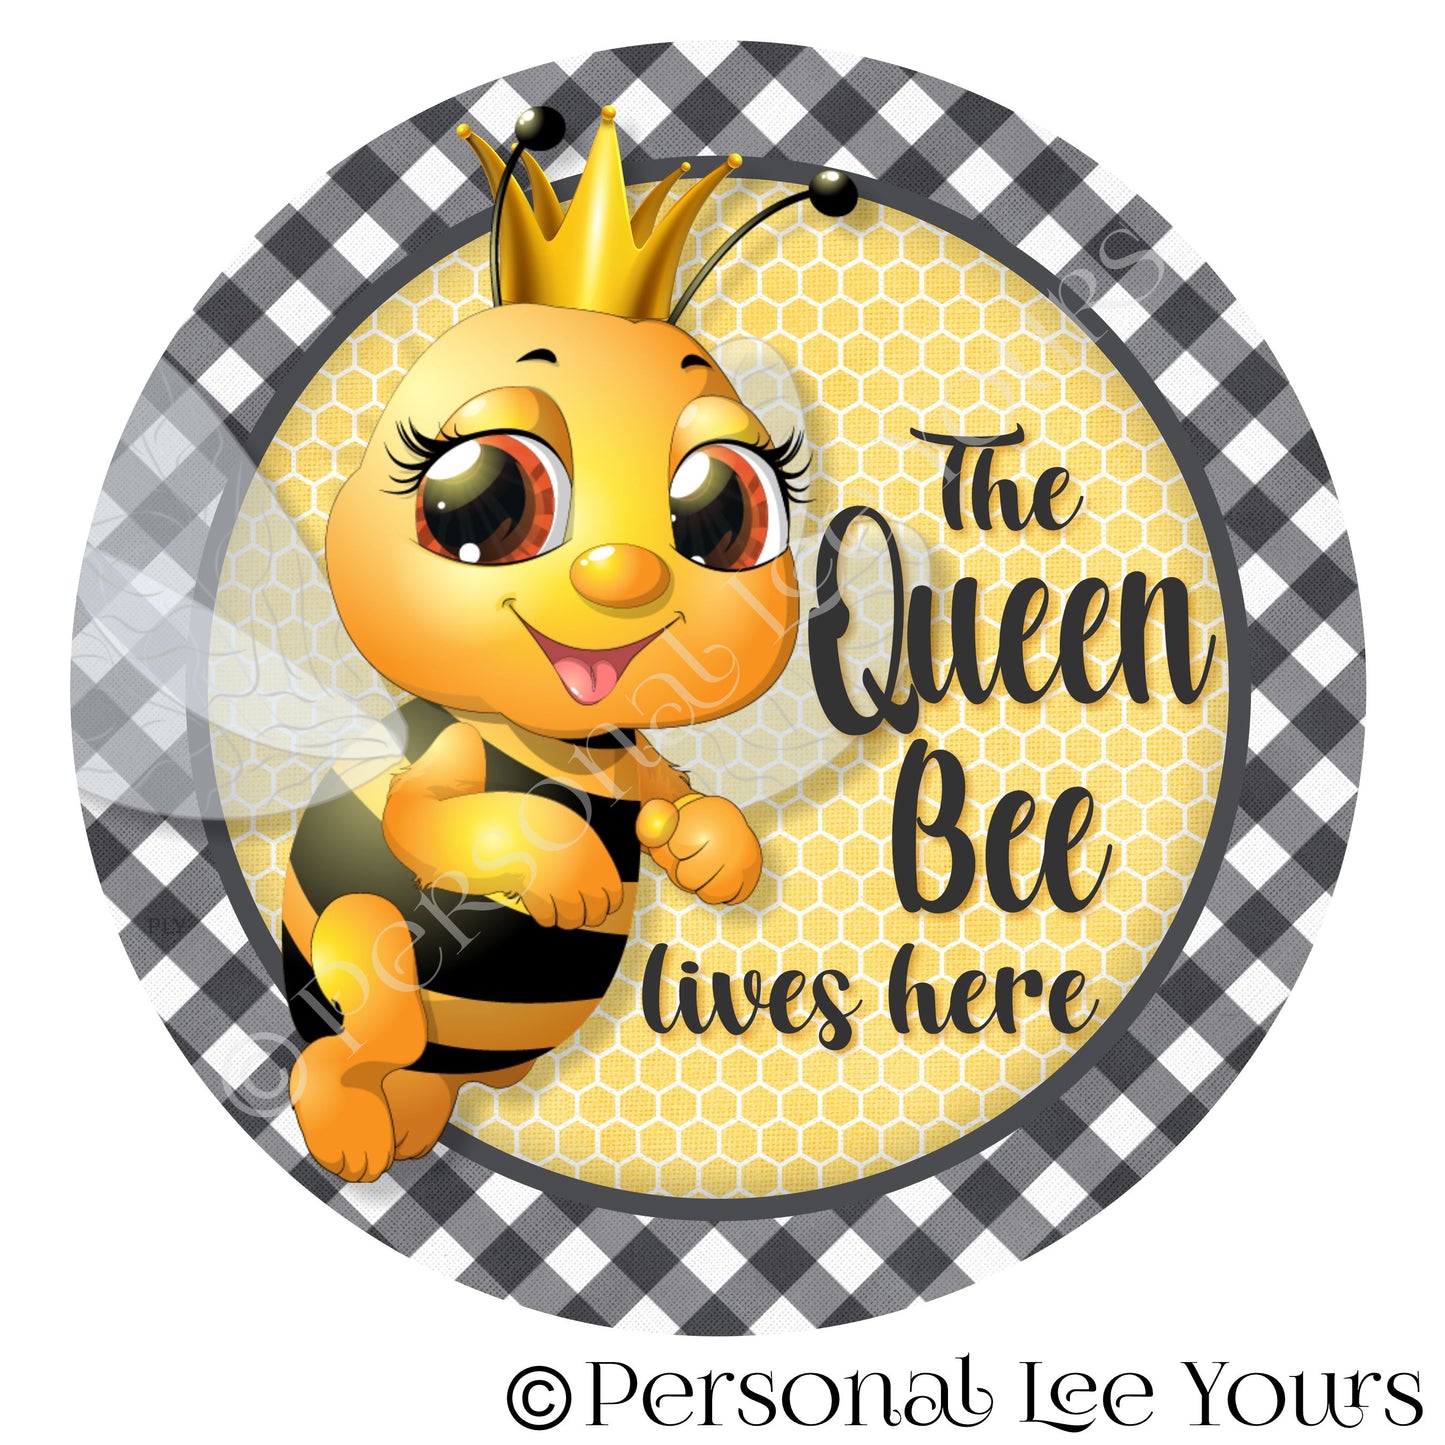 Wreath Sign * The Queen Bee Lives Here ~ Mother's Day * Gingham Trim * Round * Lightweight Metal